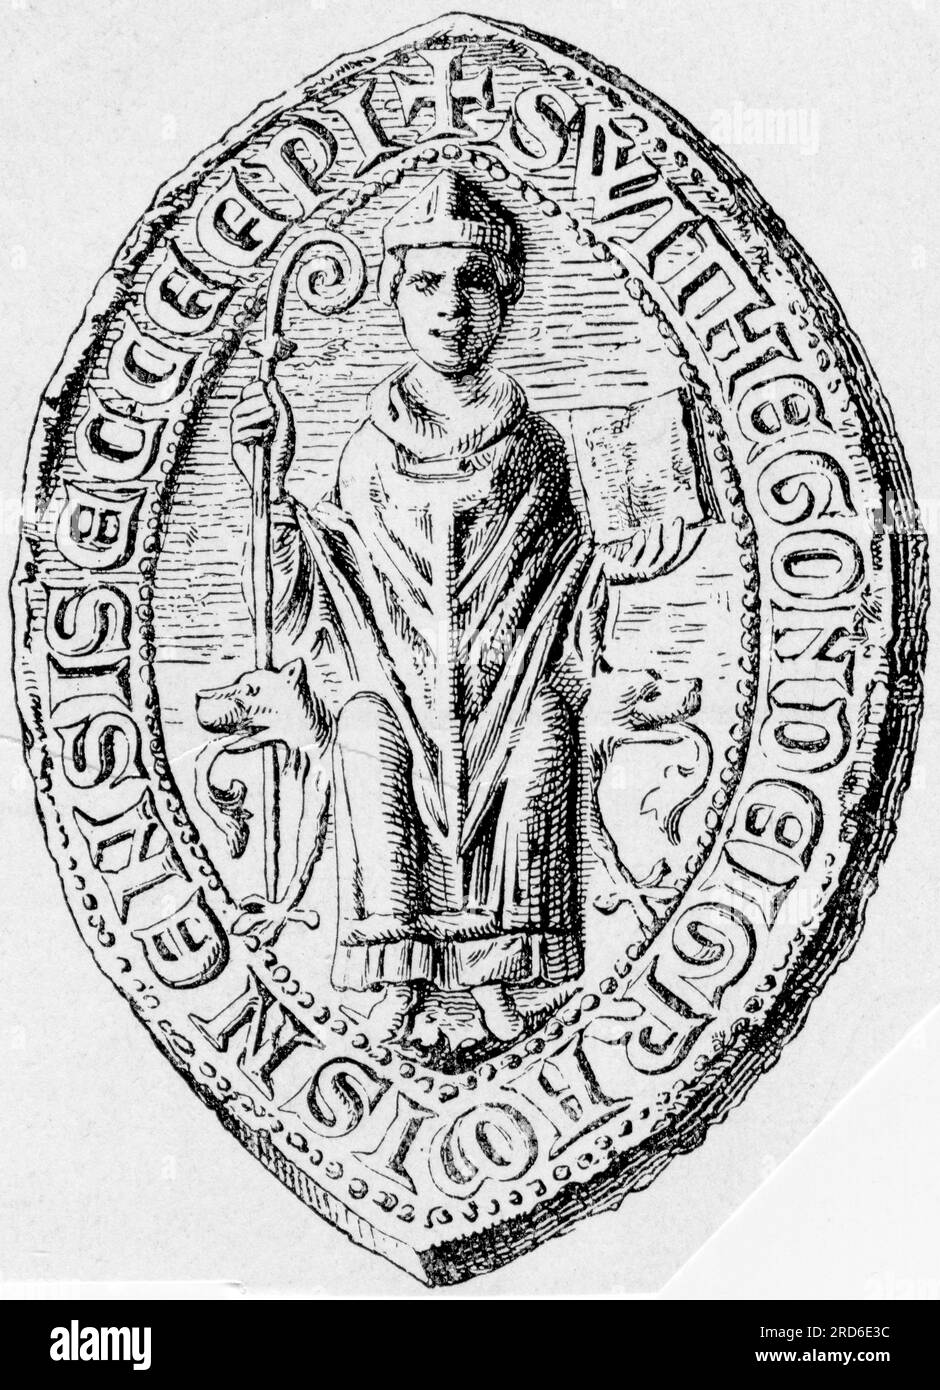 Withego of Furra, before 1250 - 6.3.1293, German clergyman, Bishop of Meissen 1266 - 1293, his seal, ARTIST'S COPYRIGHT HAS NOT TO BE CLEARED Stock Photo